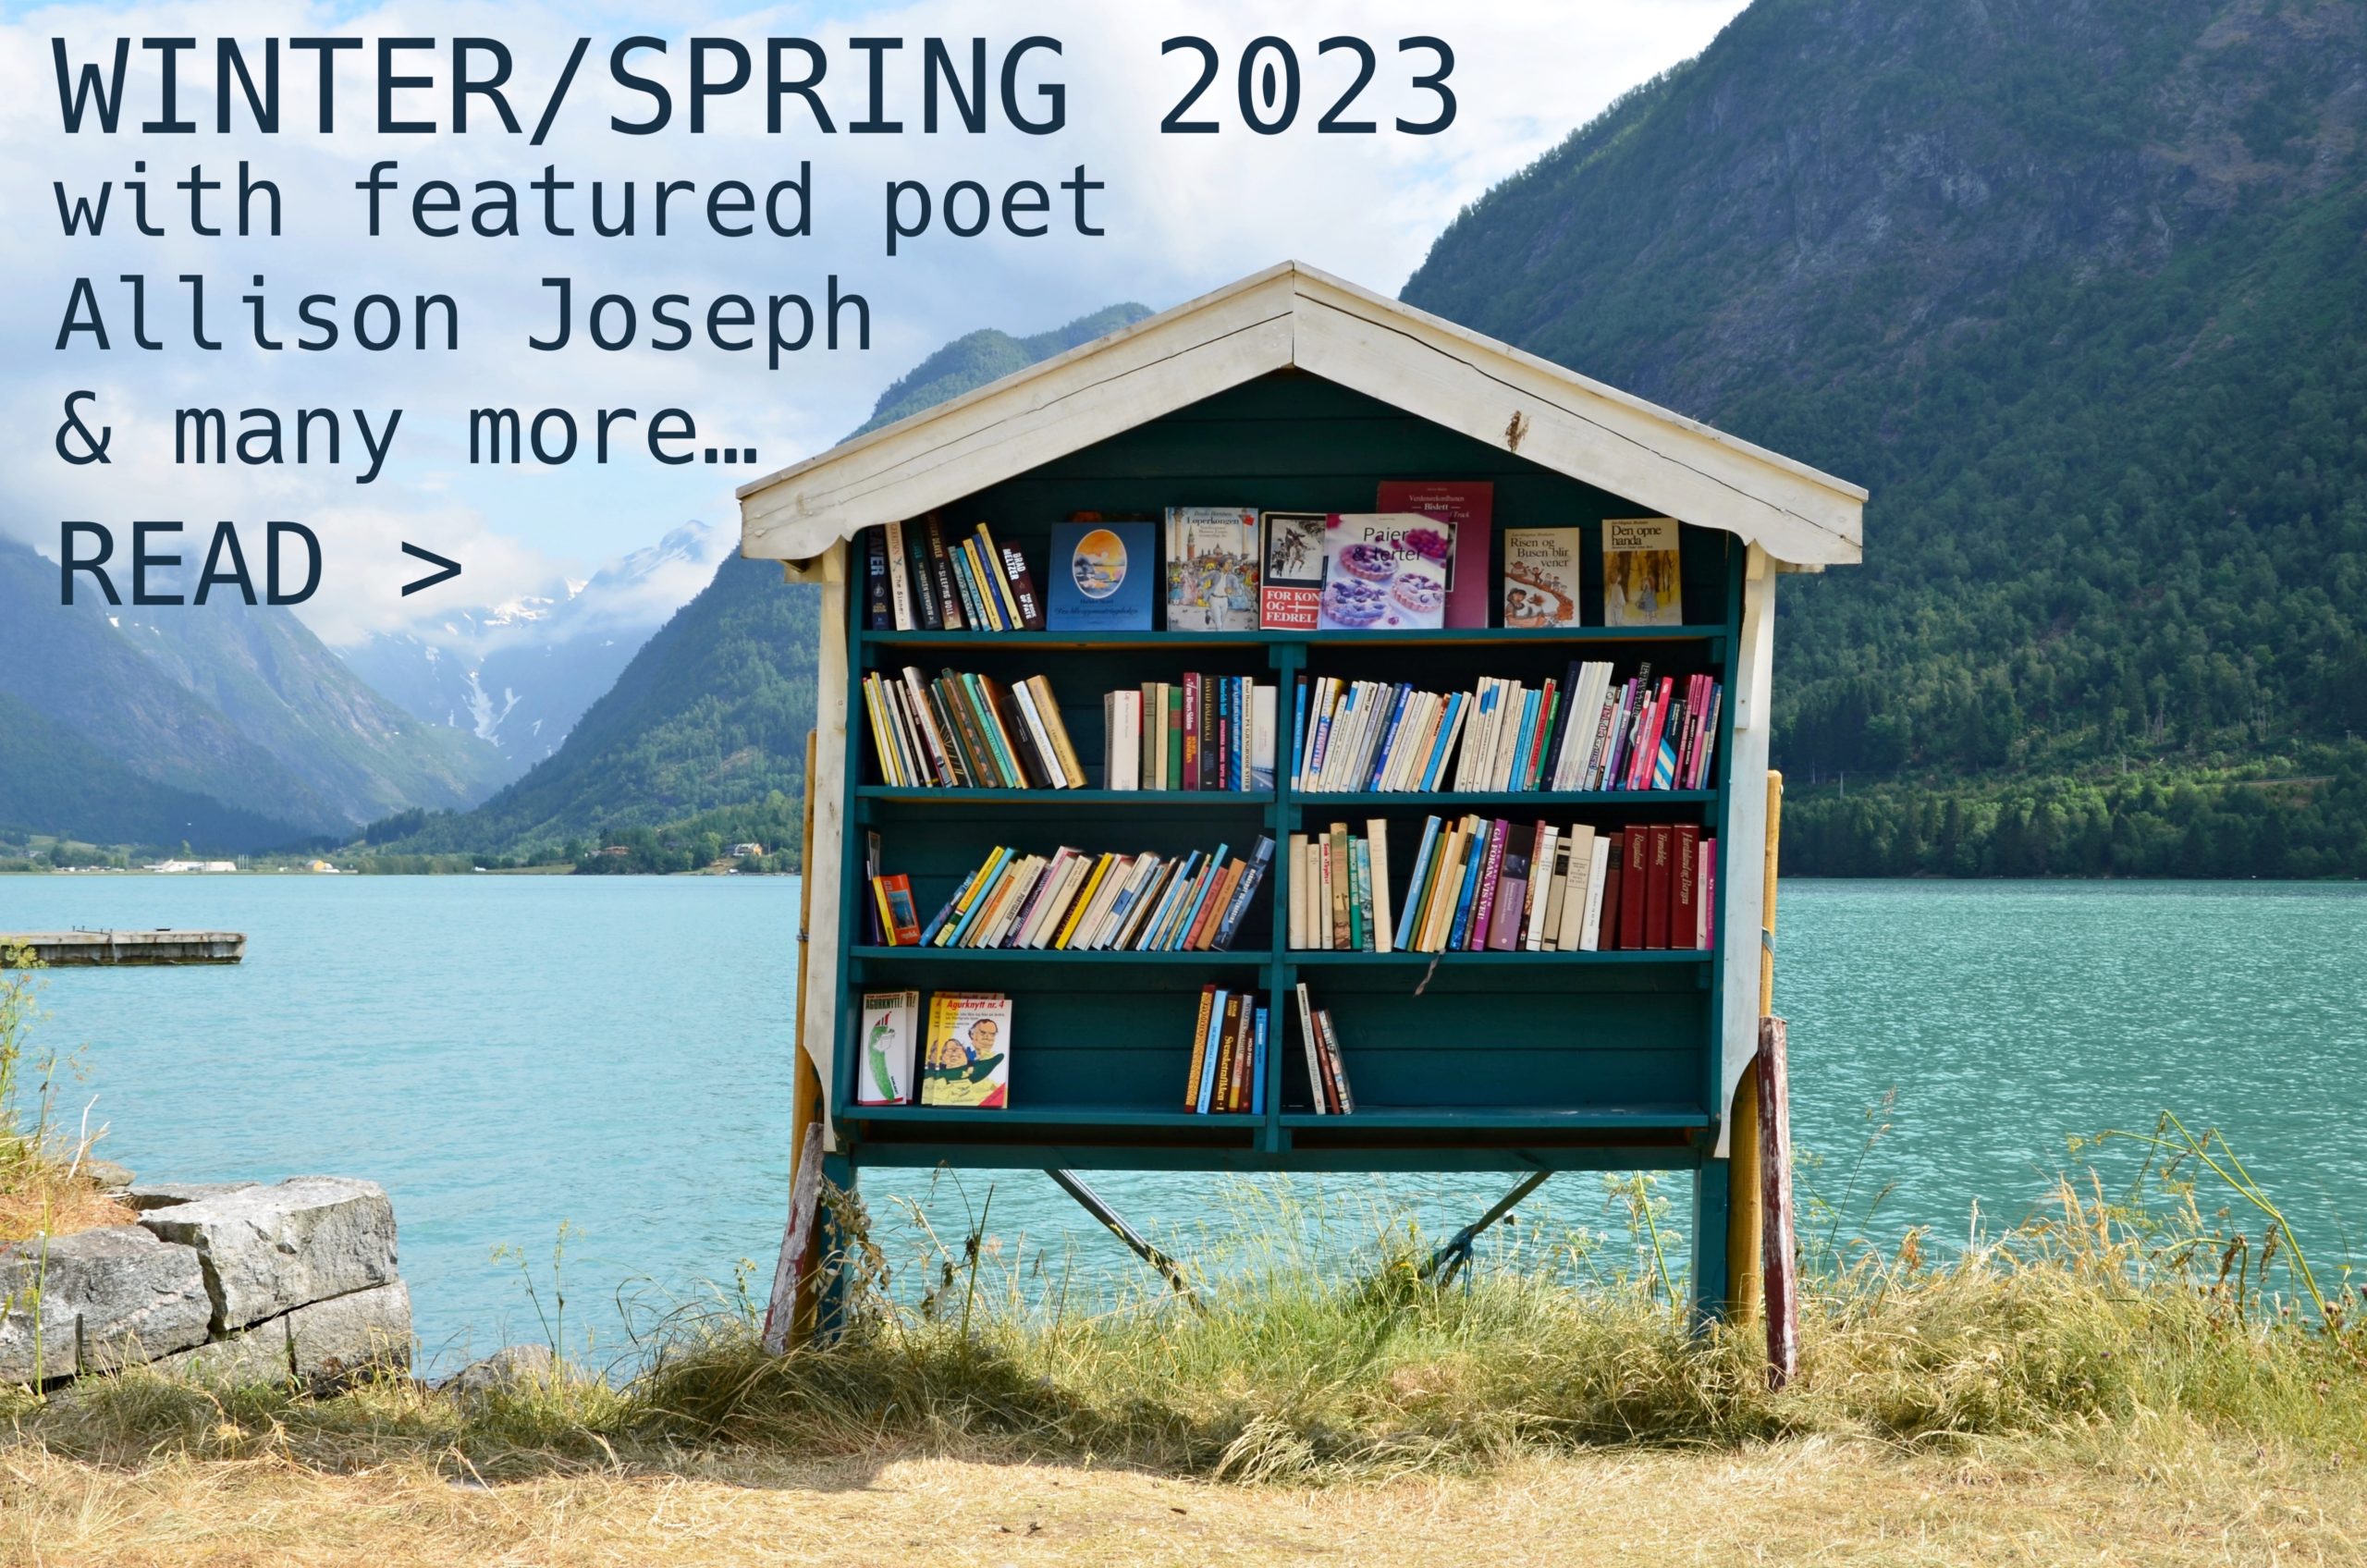 Winter/Spring 2023 with featured poet Allison Joseph & many more...